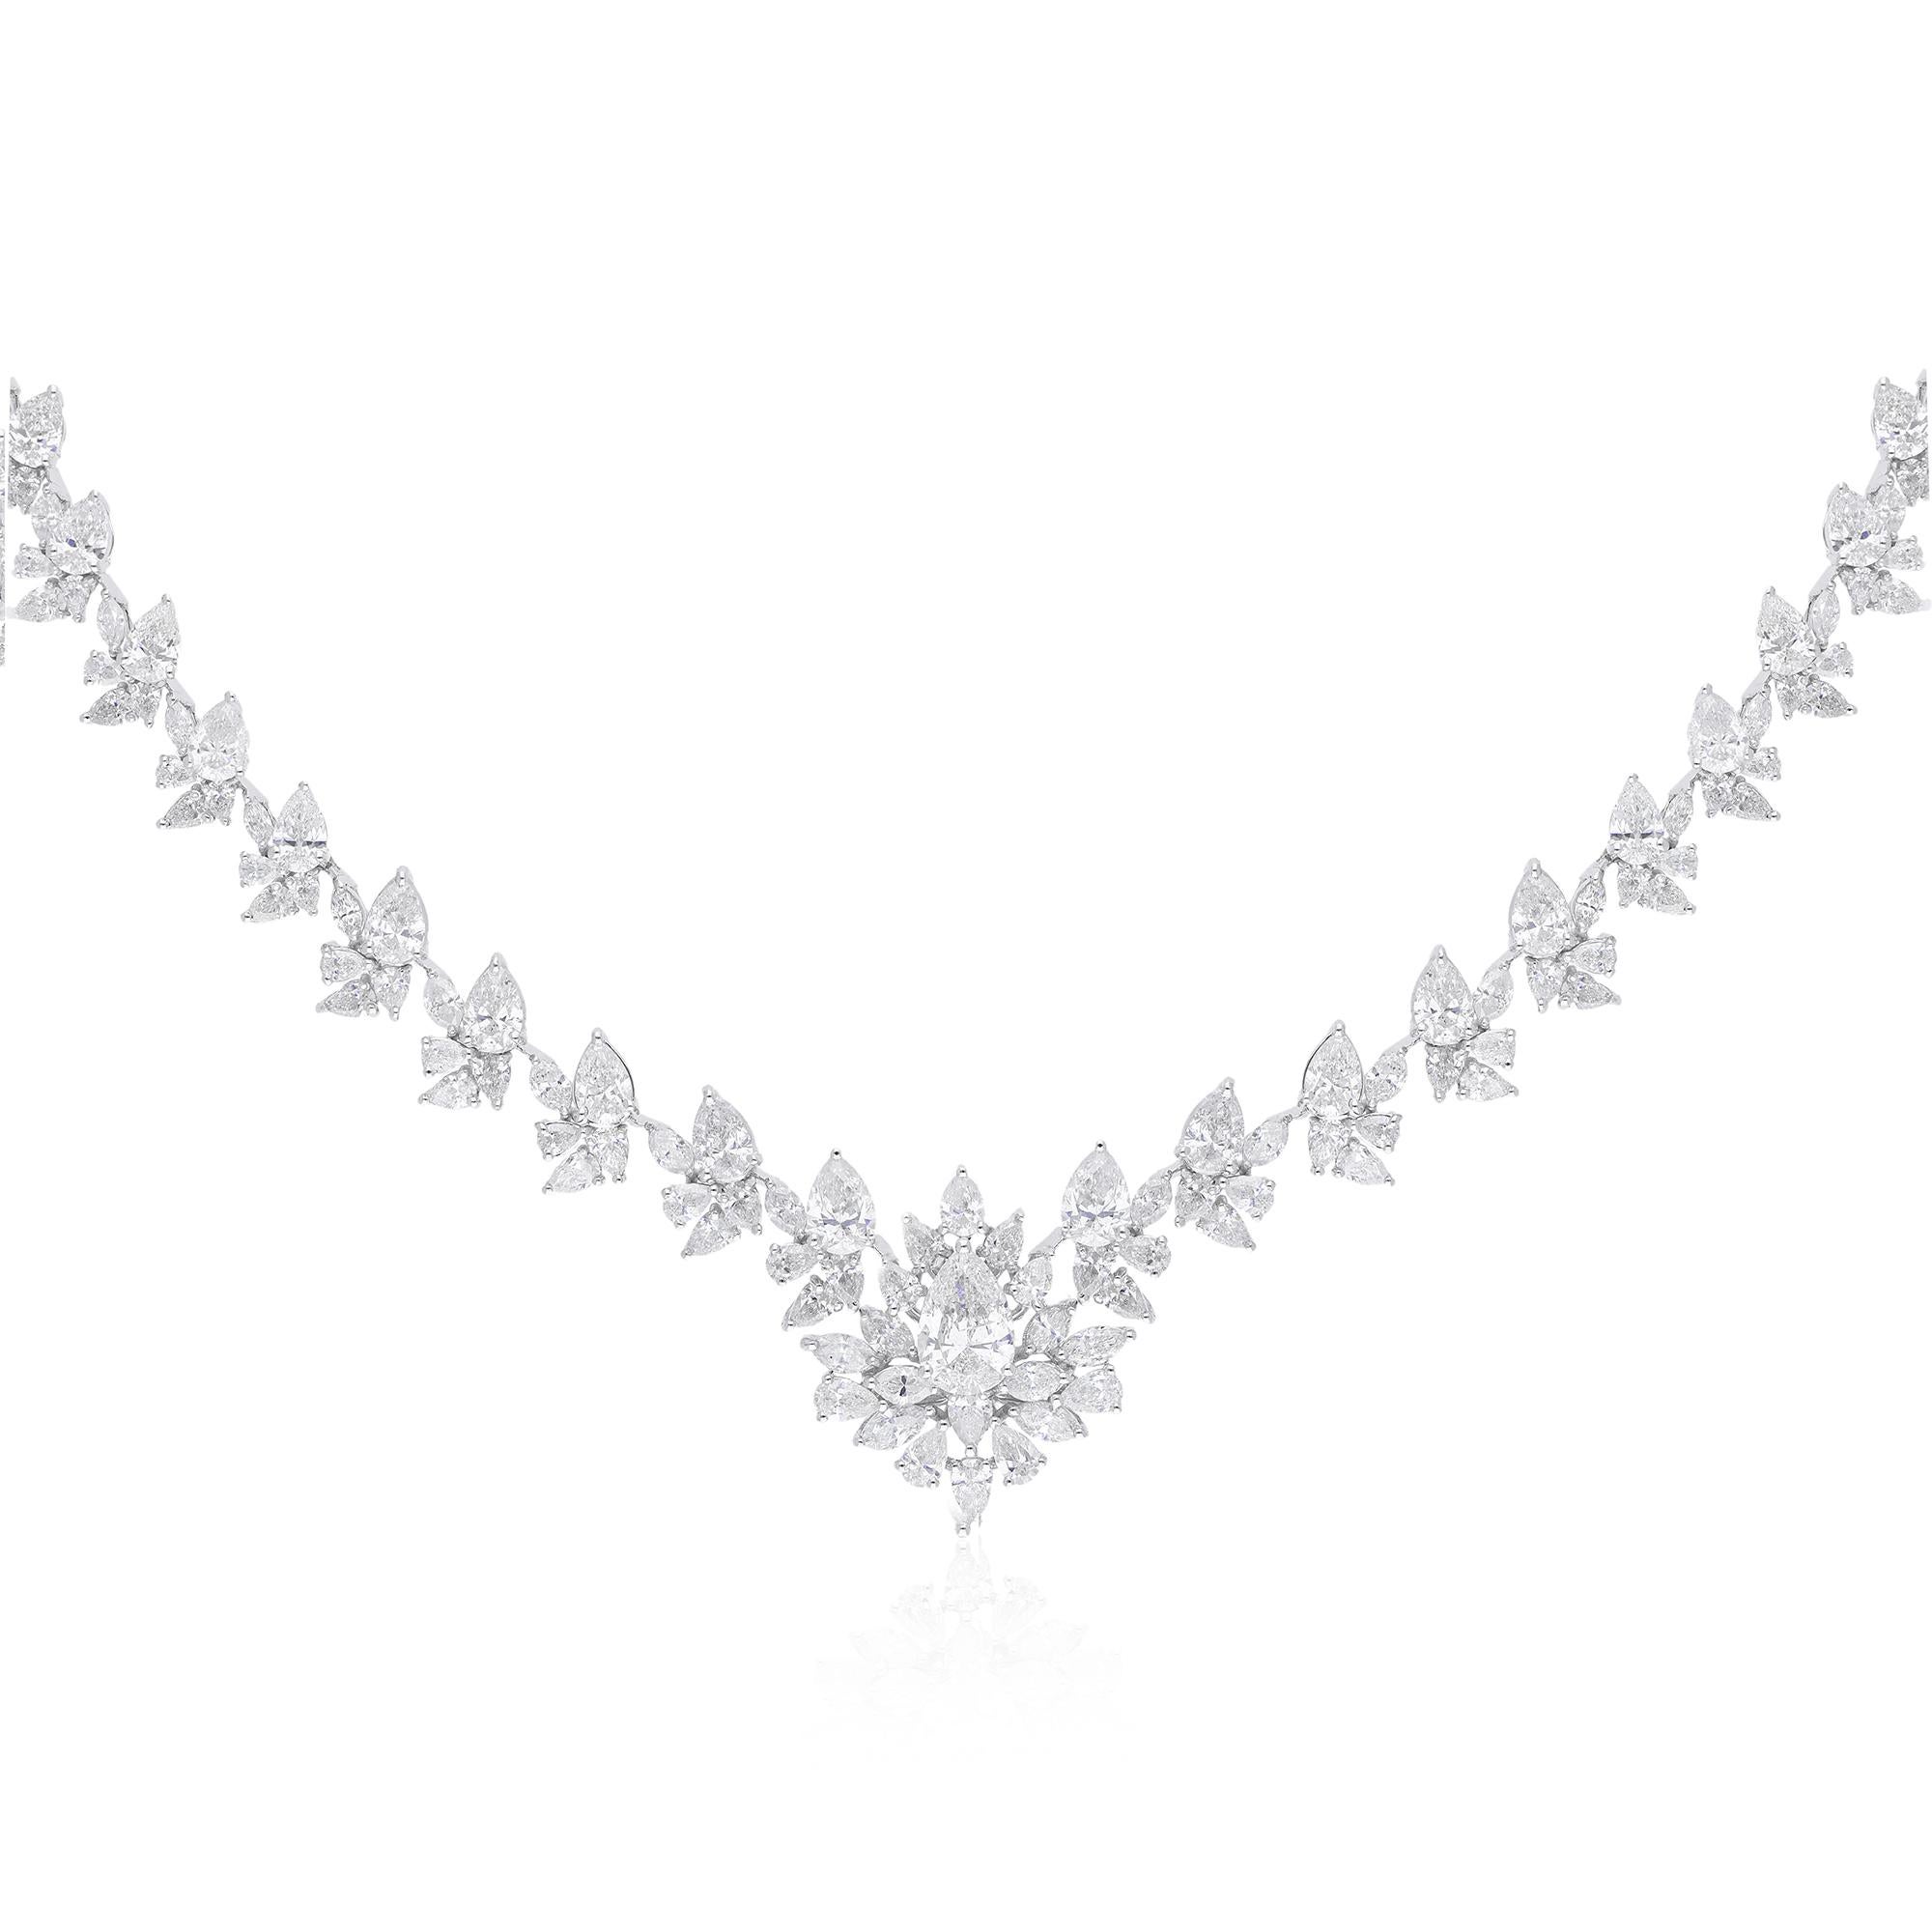 At the heart of this exquisite necklace lies a stunning 17.24 carat pear marquise-cut diamond, meticulously selected for its unparalleled brilliance and clarity. The pear marquise cut, renowned for its elongated shape and graceful curves, showcases